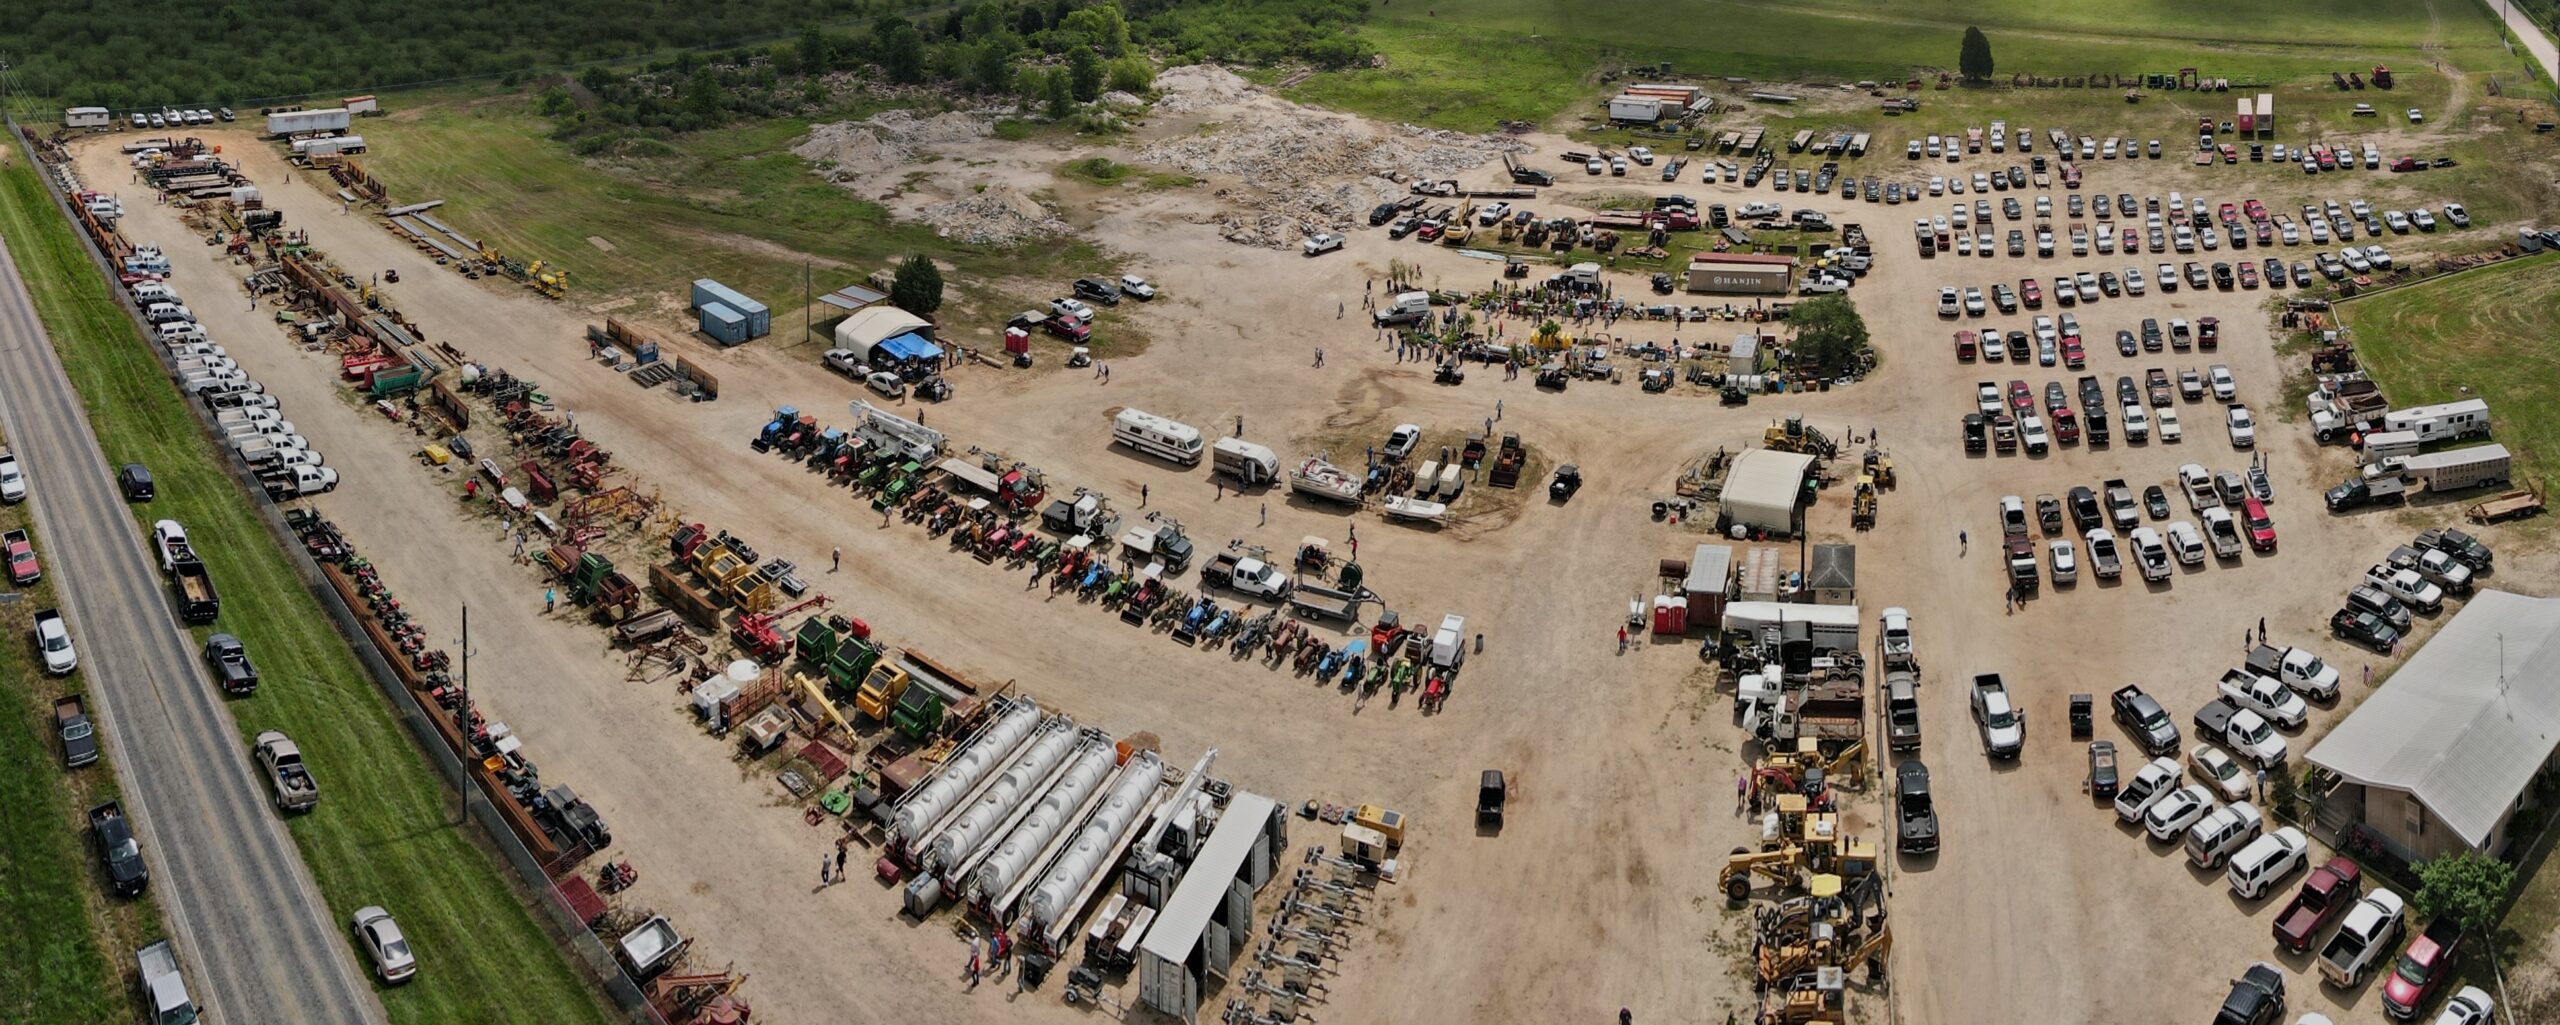 Sell your Used Farm Equipment, Construction Equipment and Trucks with Switzer Auction.